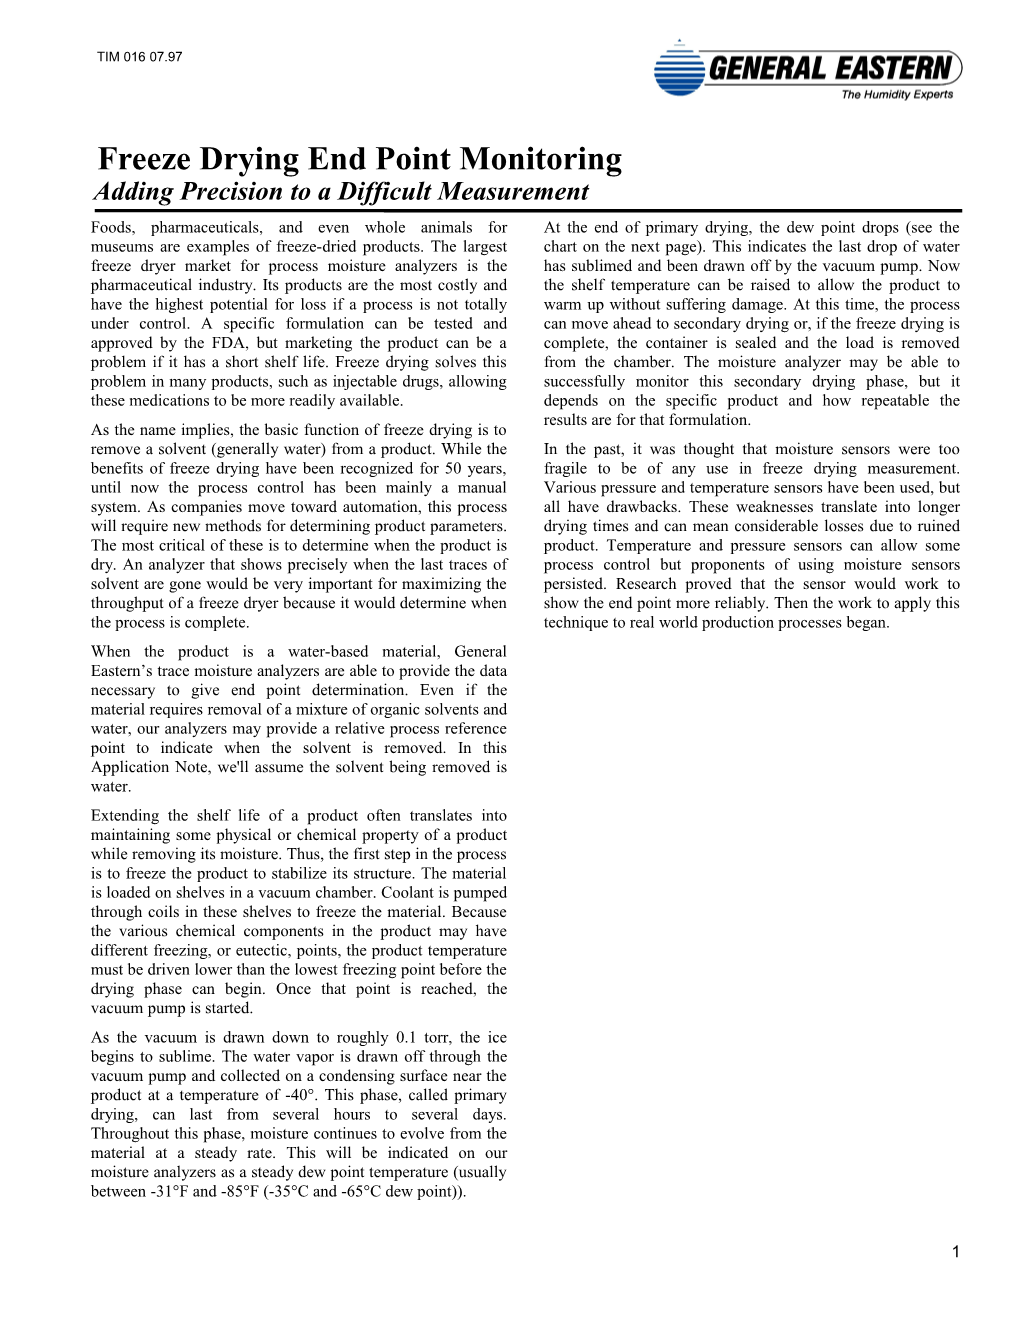 Freeze Drying End Point Monitoring